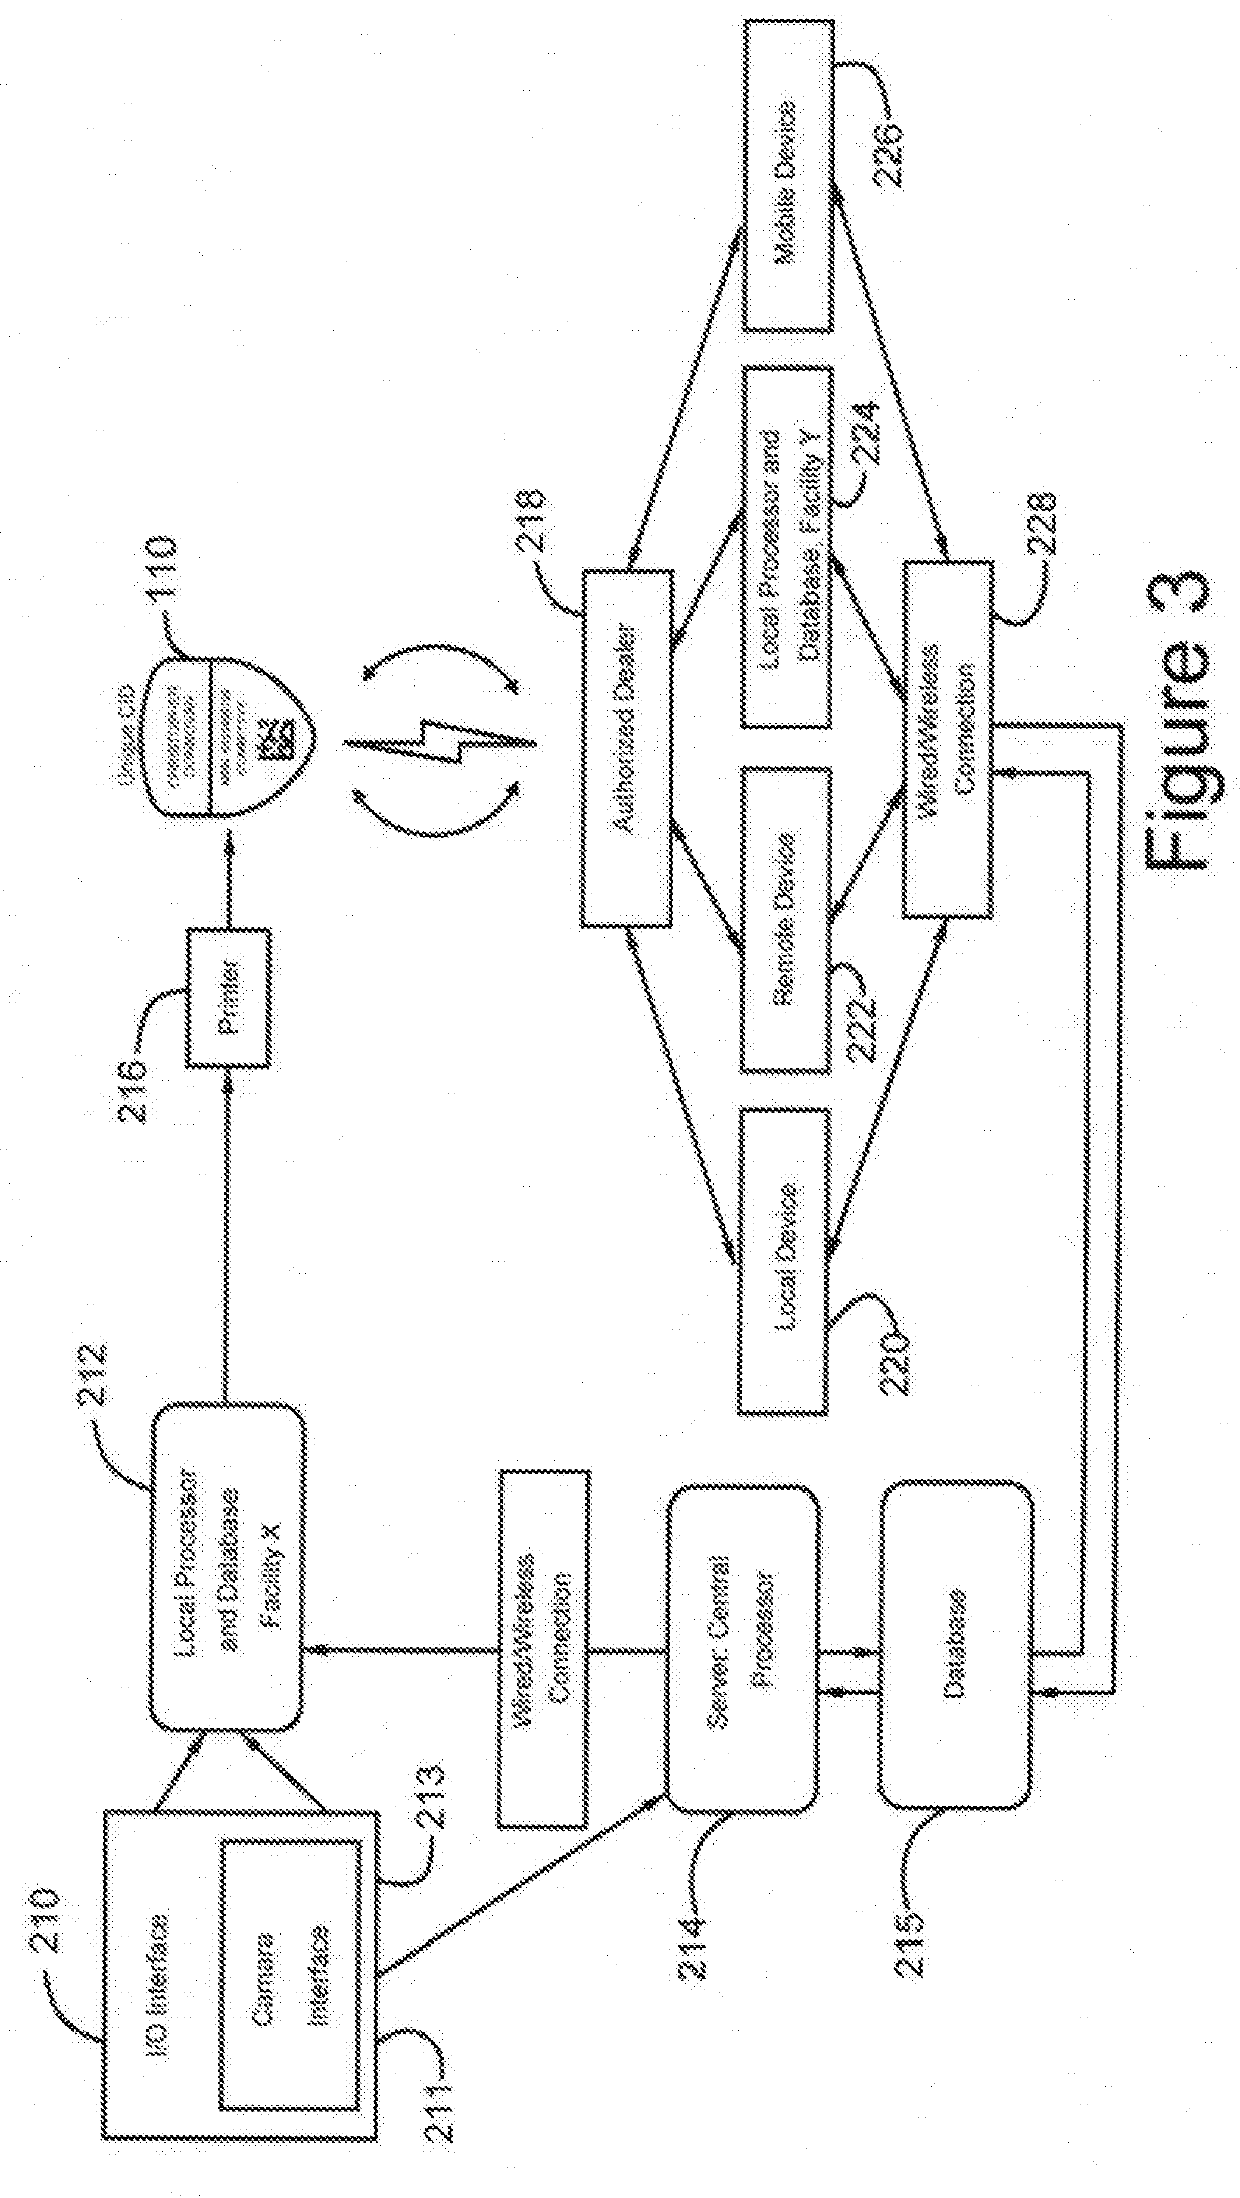 Systems and methods for transitions of care